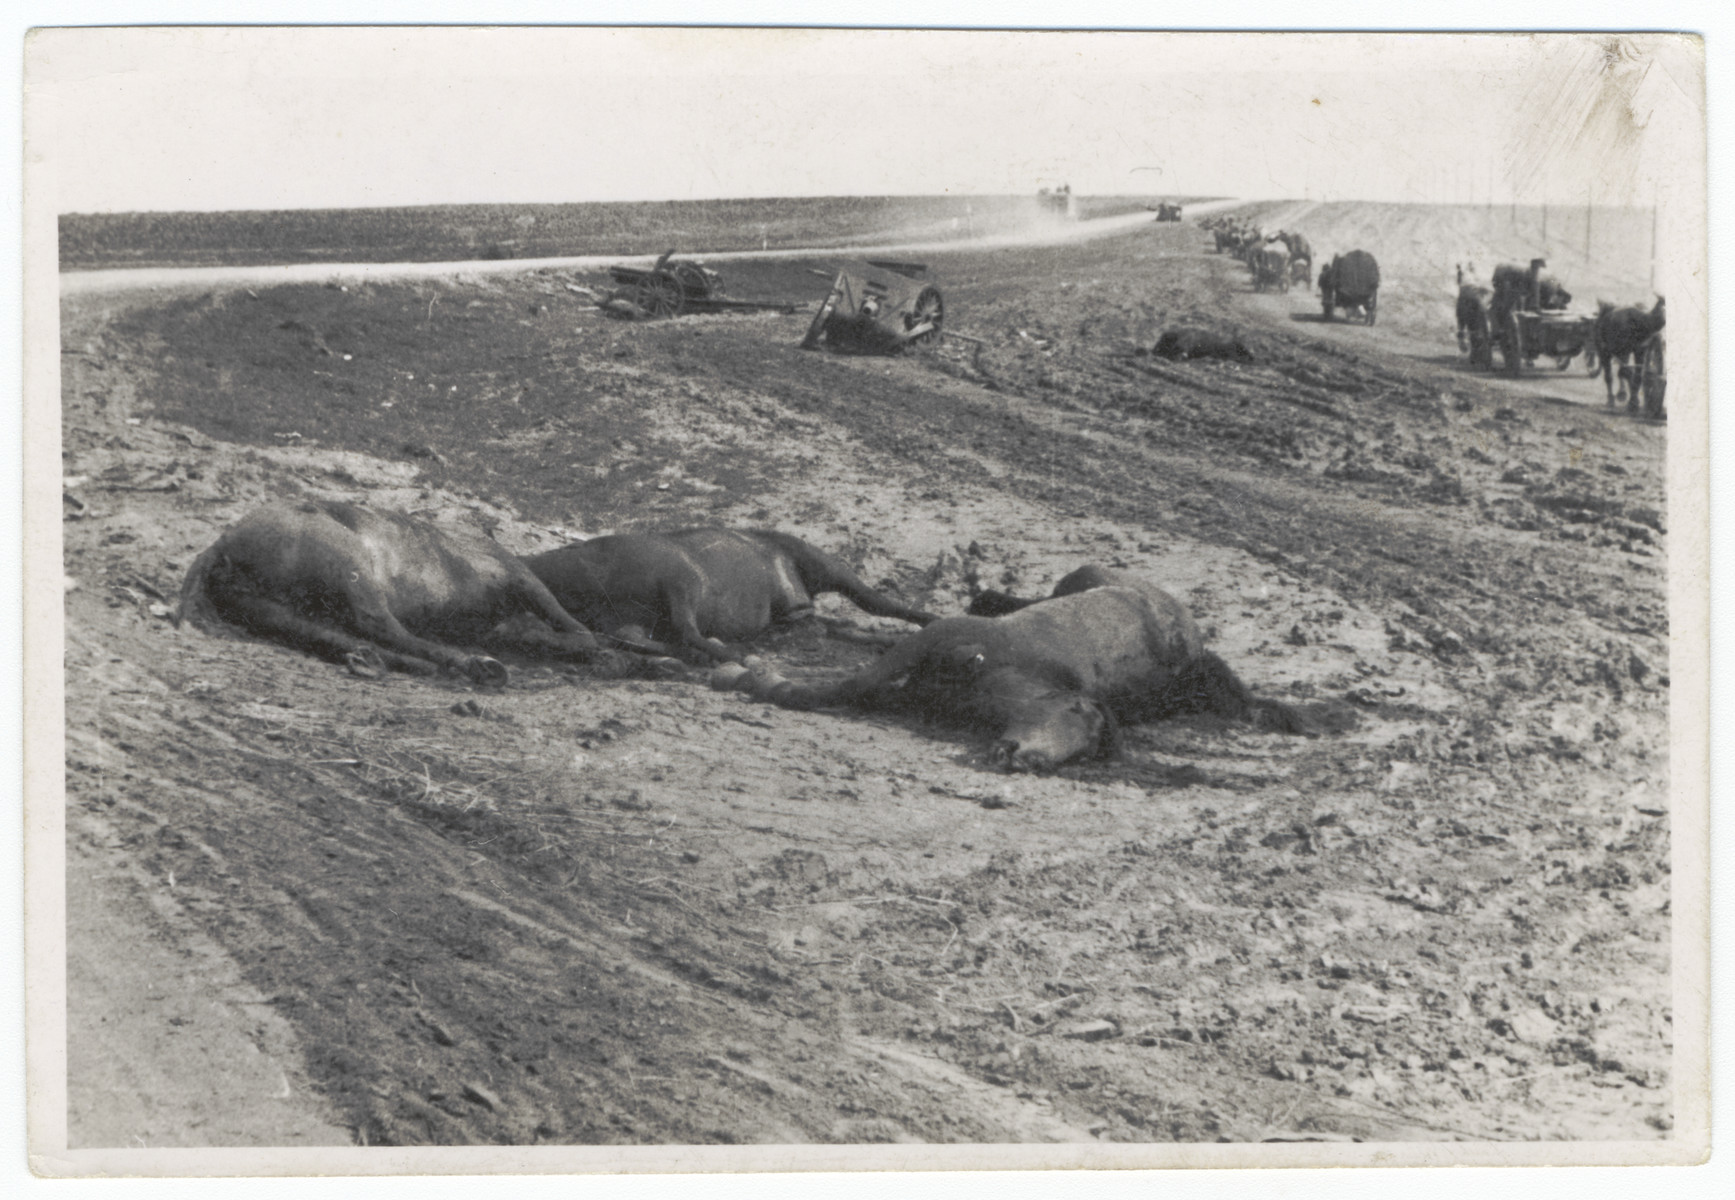 Dead horses lie on the side of a road [probably during the German invasion of the Soviet Union.]